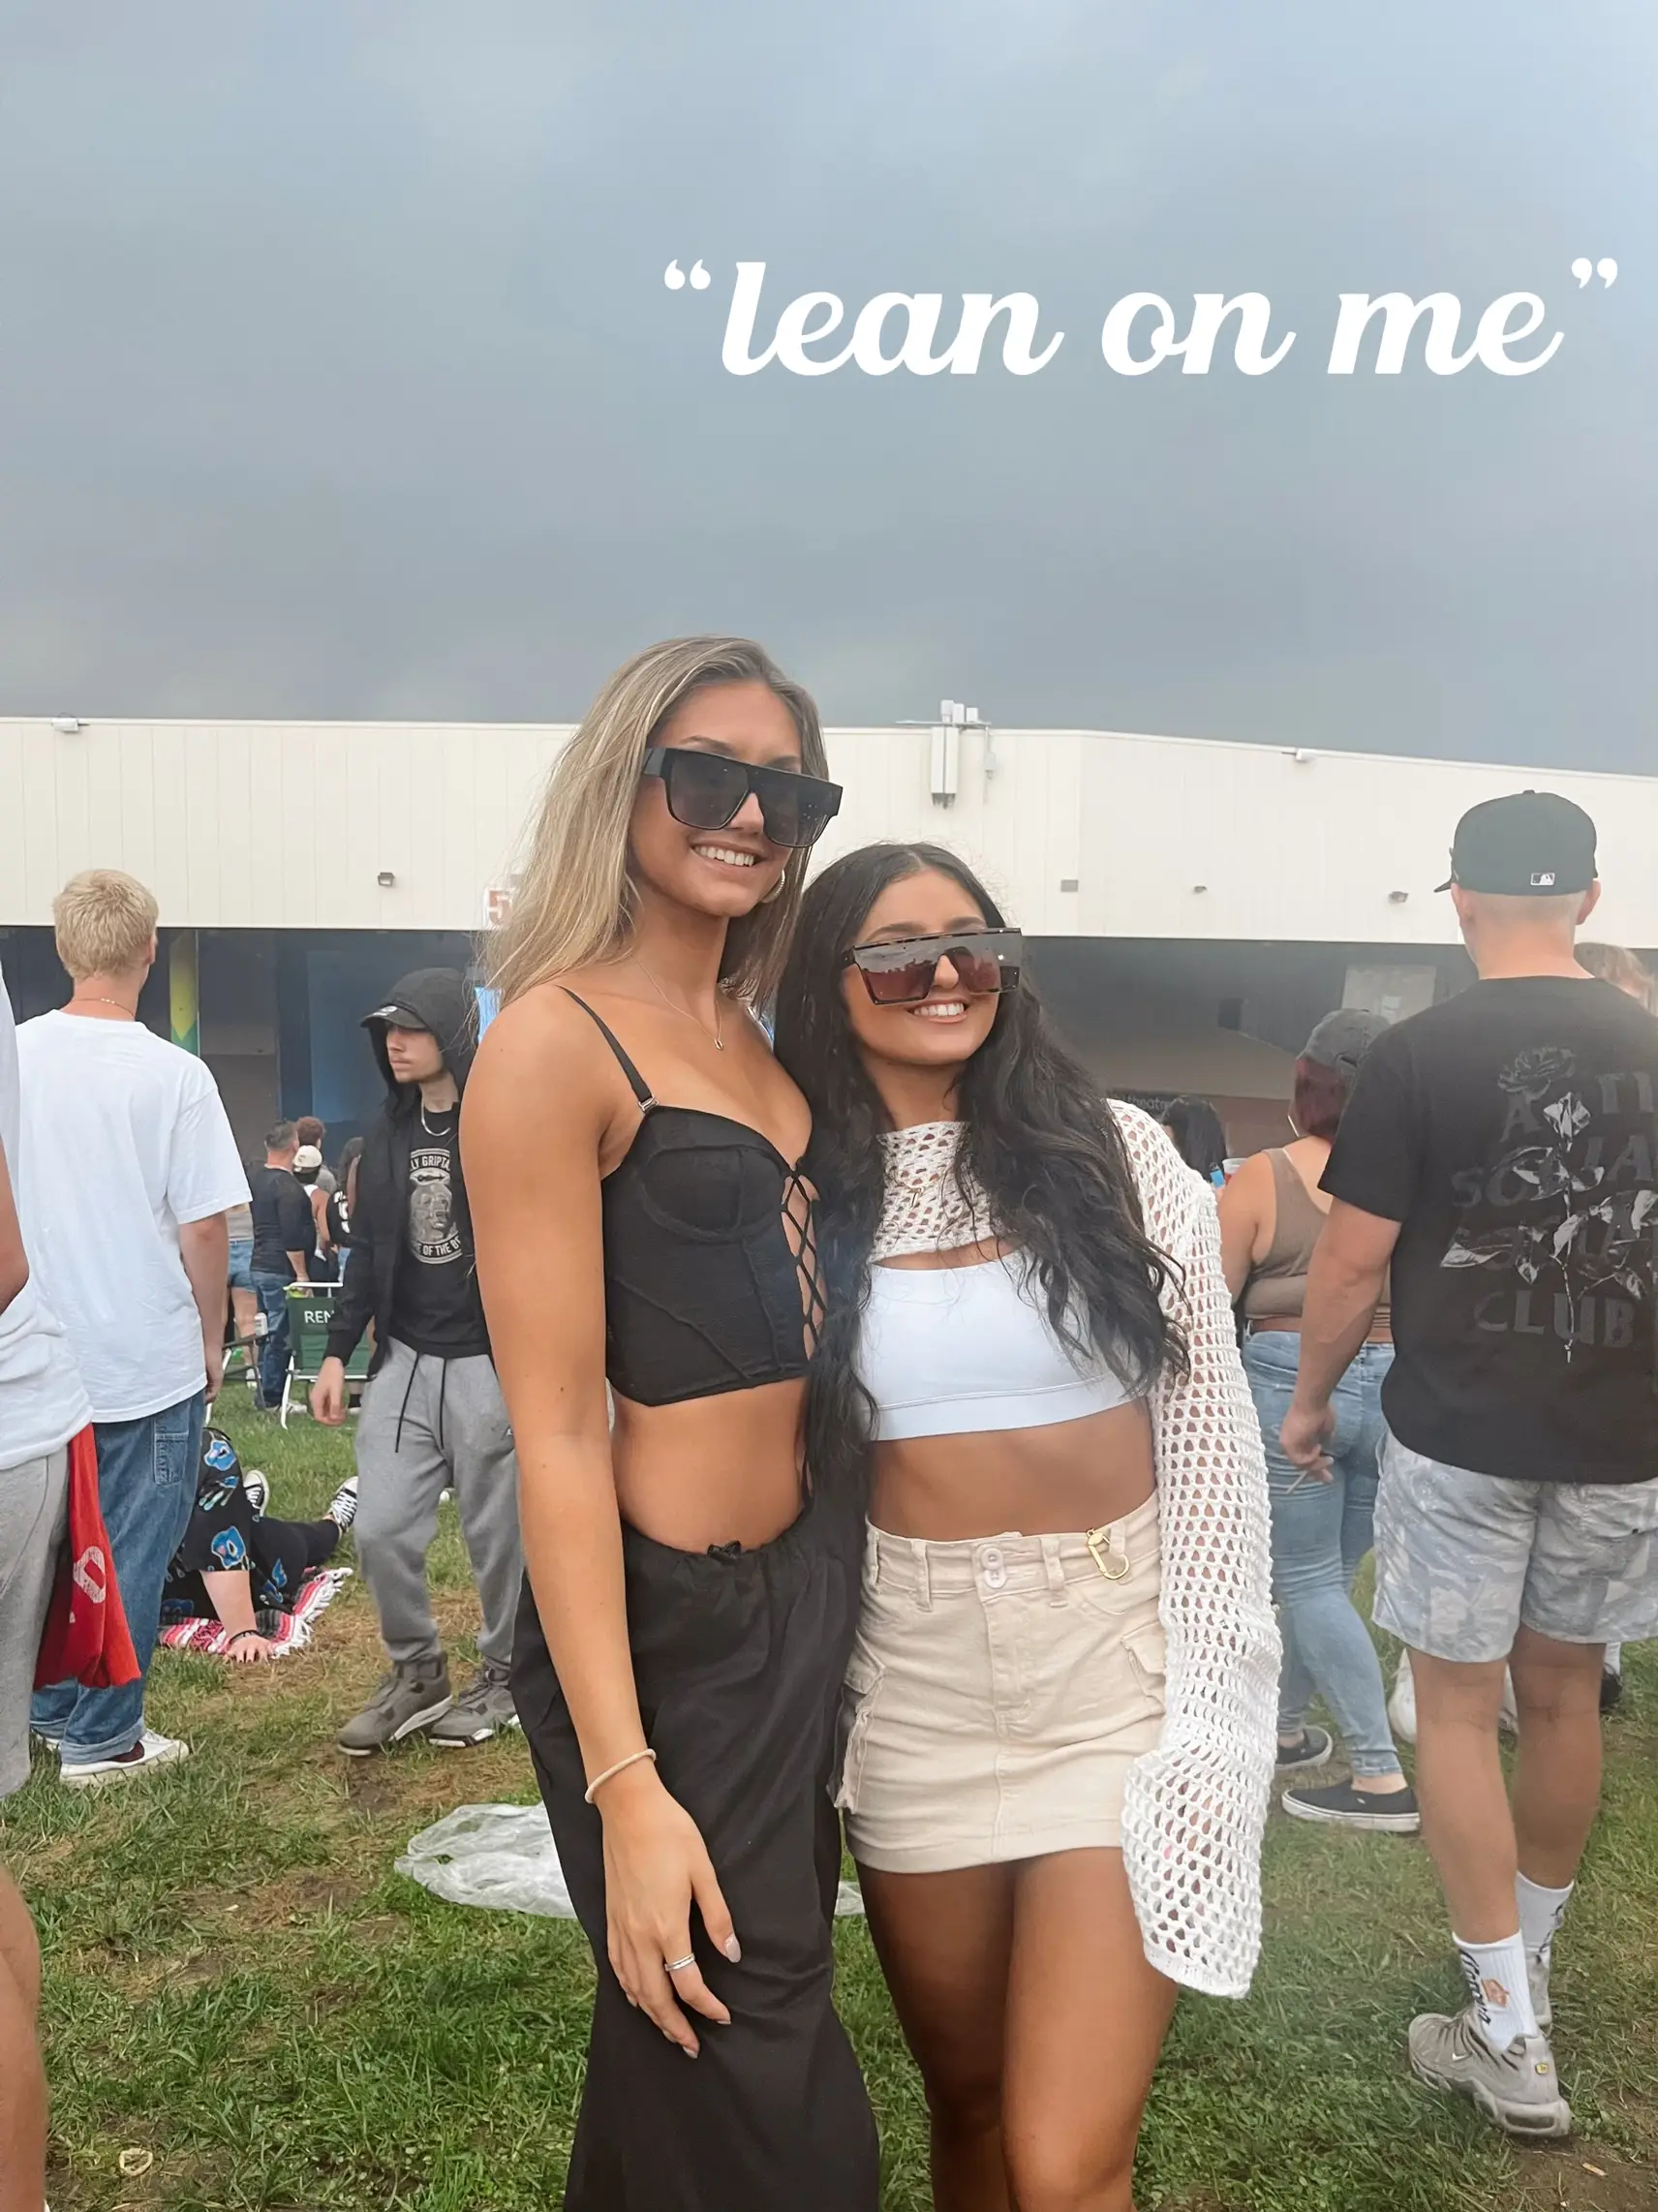  Two women are standing next to each other, posing for a picture. They are wearing shorts and sunglasses. The words "lean on me" are written above them.